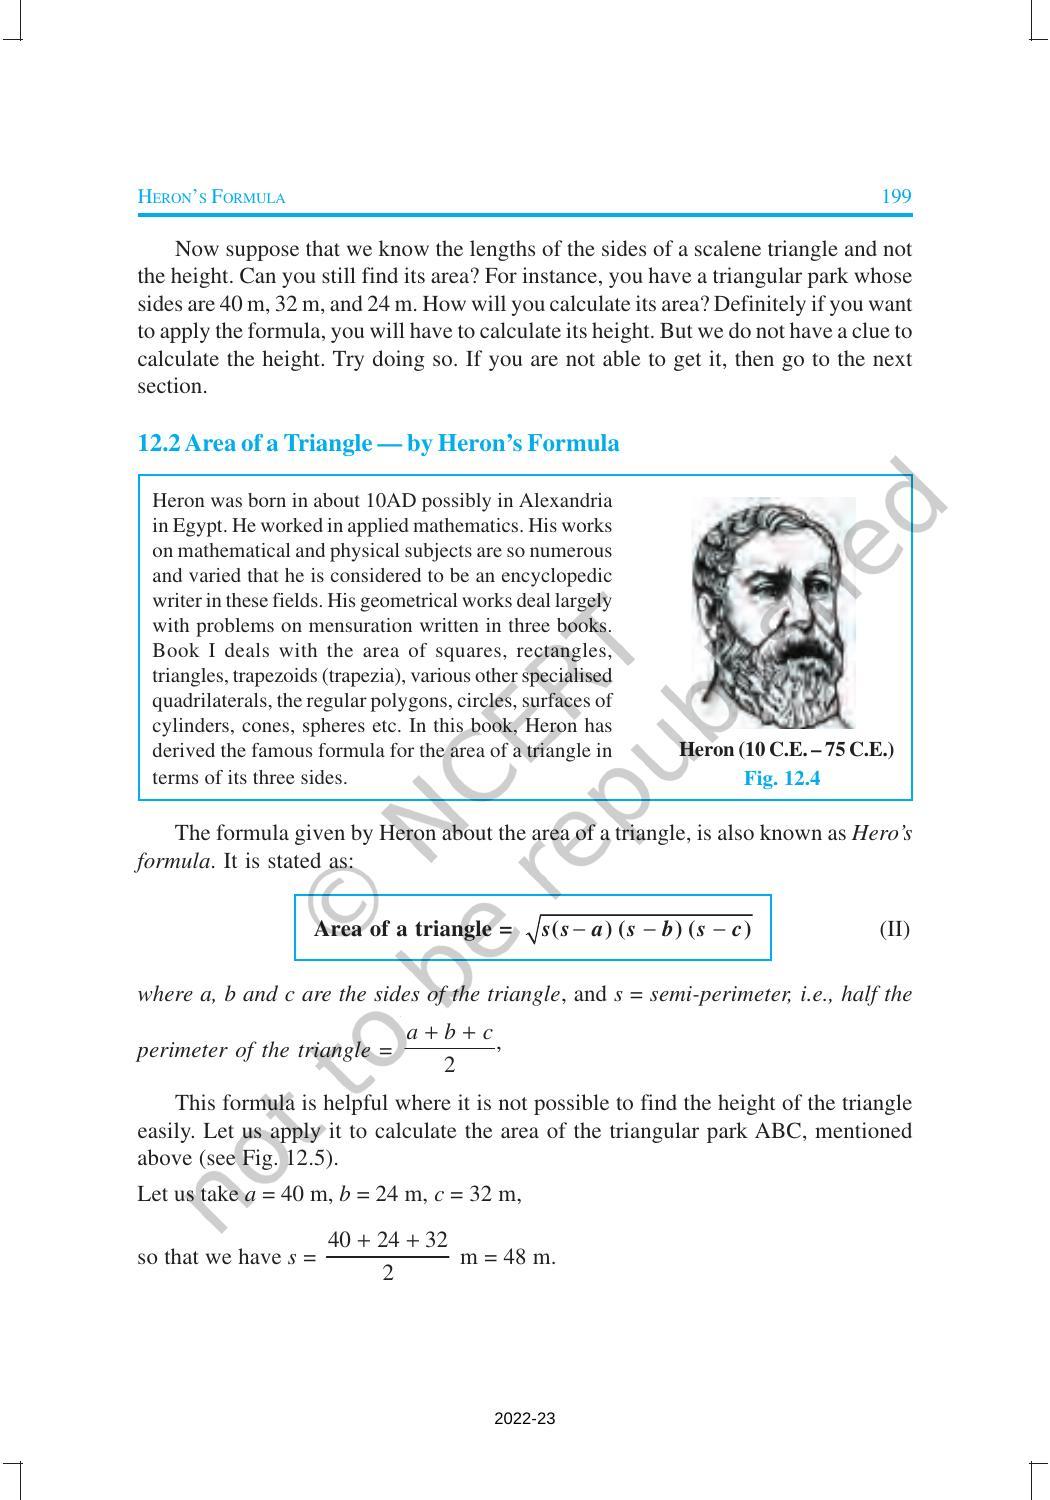 NCERT Book for Class 9 Maths Chapter 12 Heron’s Formula - Page 3